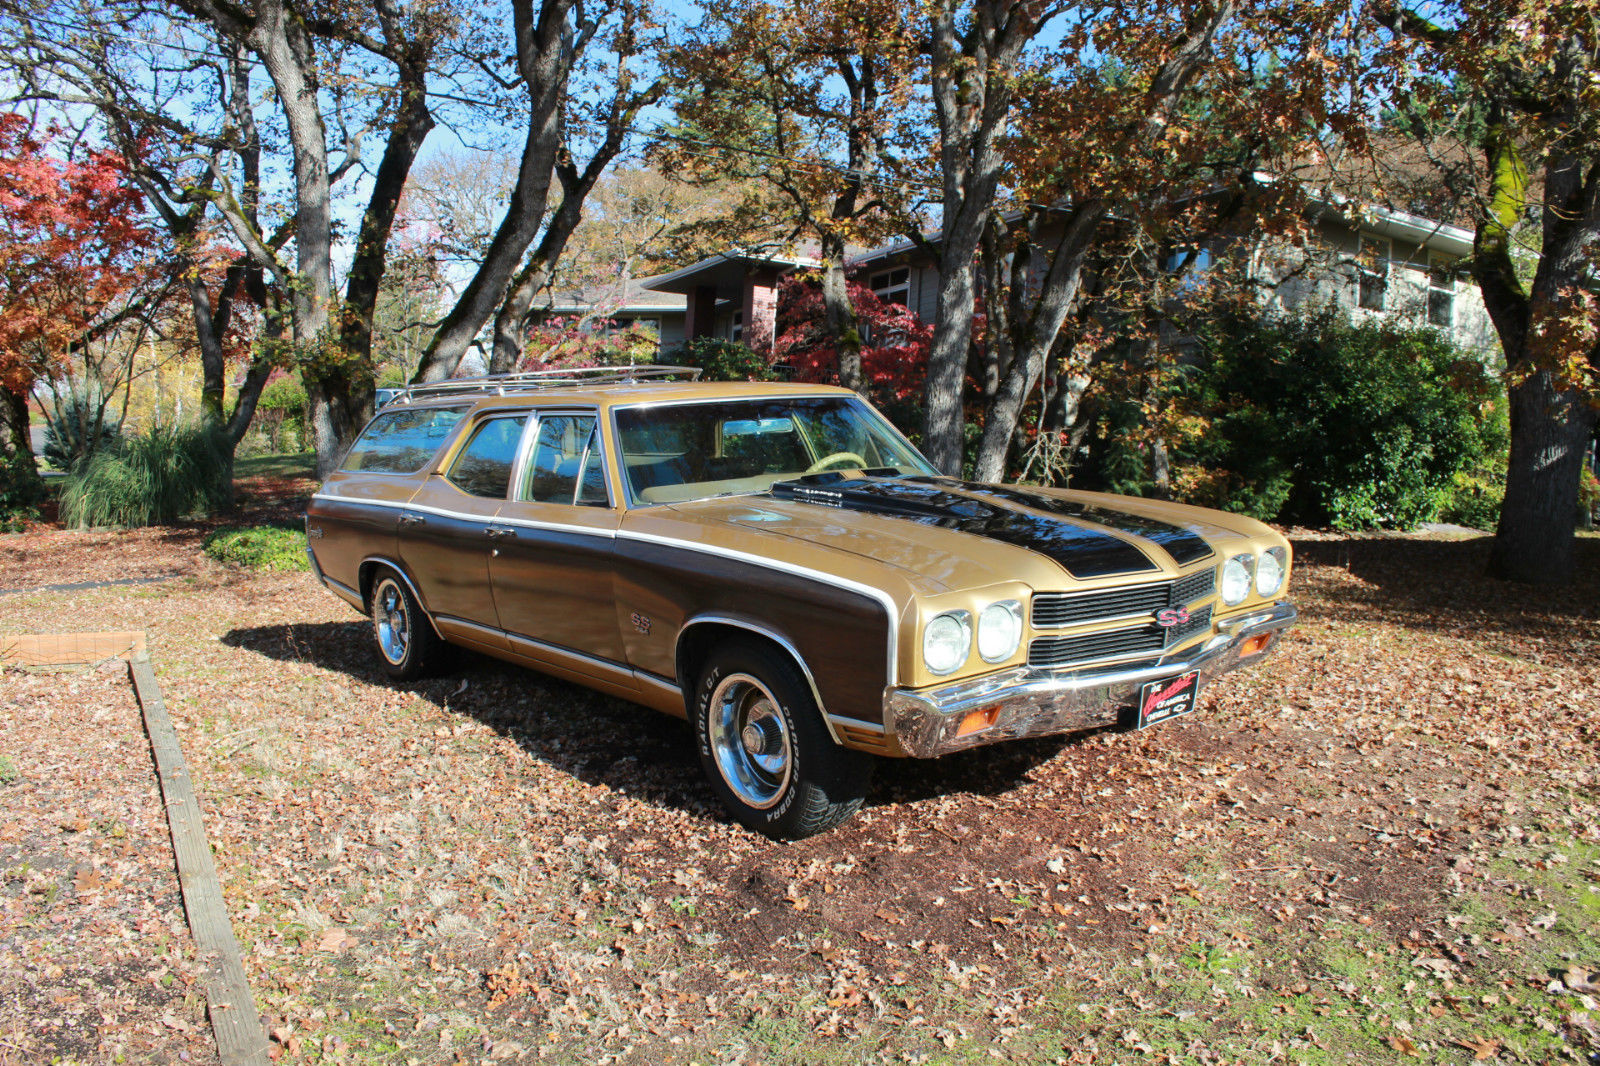 This 1970 Chevelle Concours Wagon Has Factory Big Block Power, Woodgrain, and A Minto Interior!